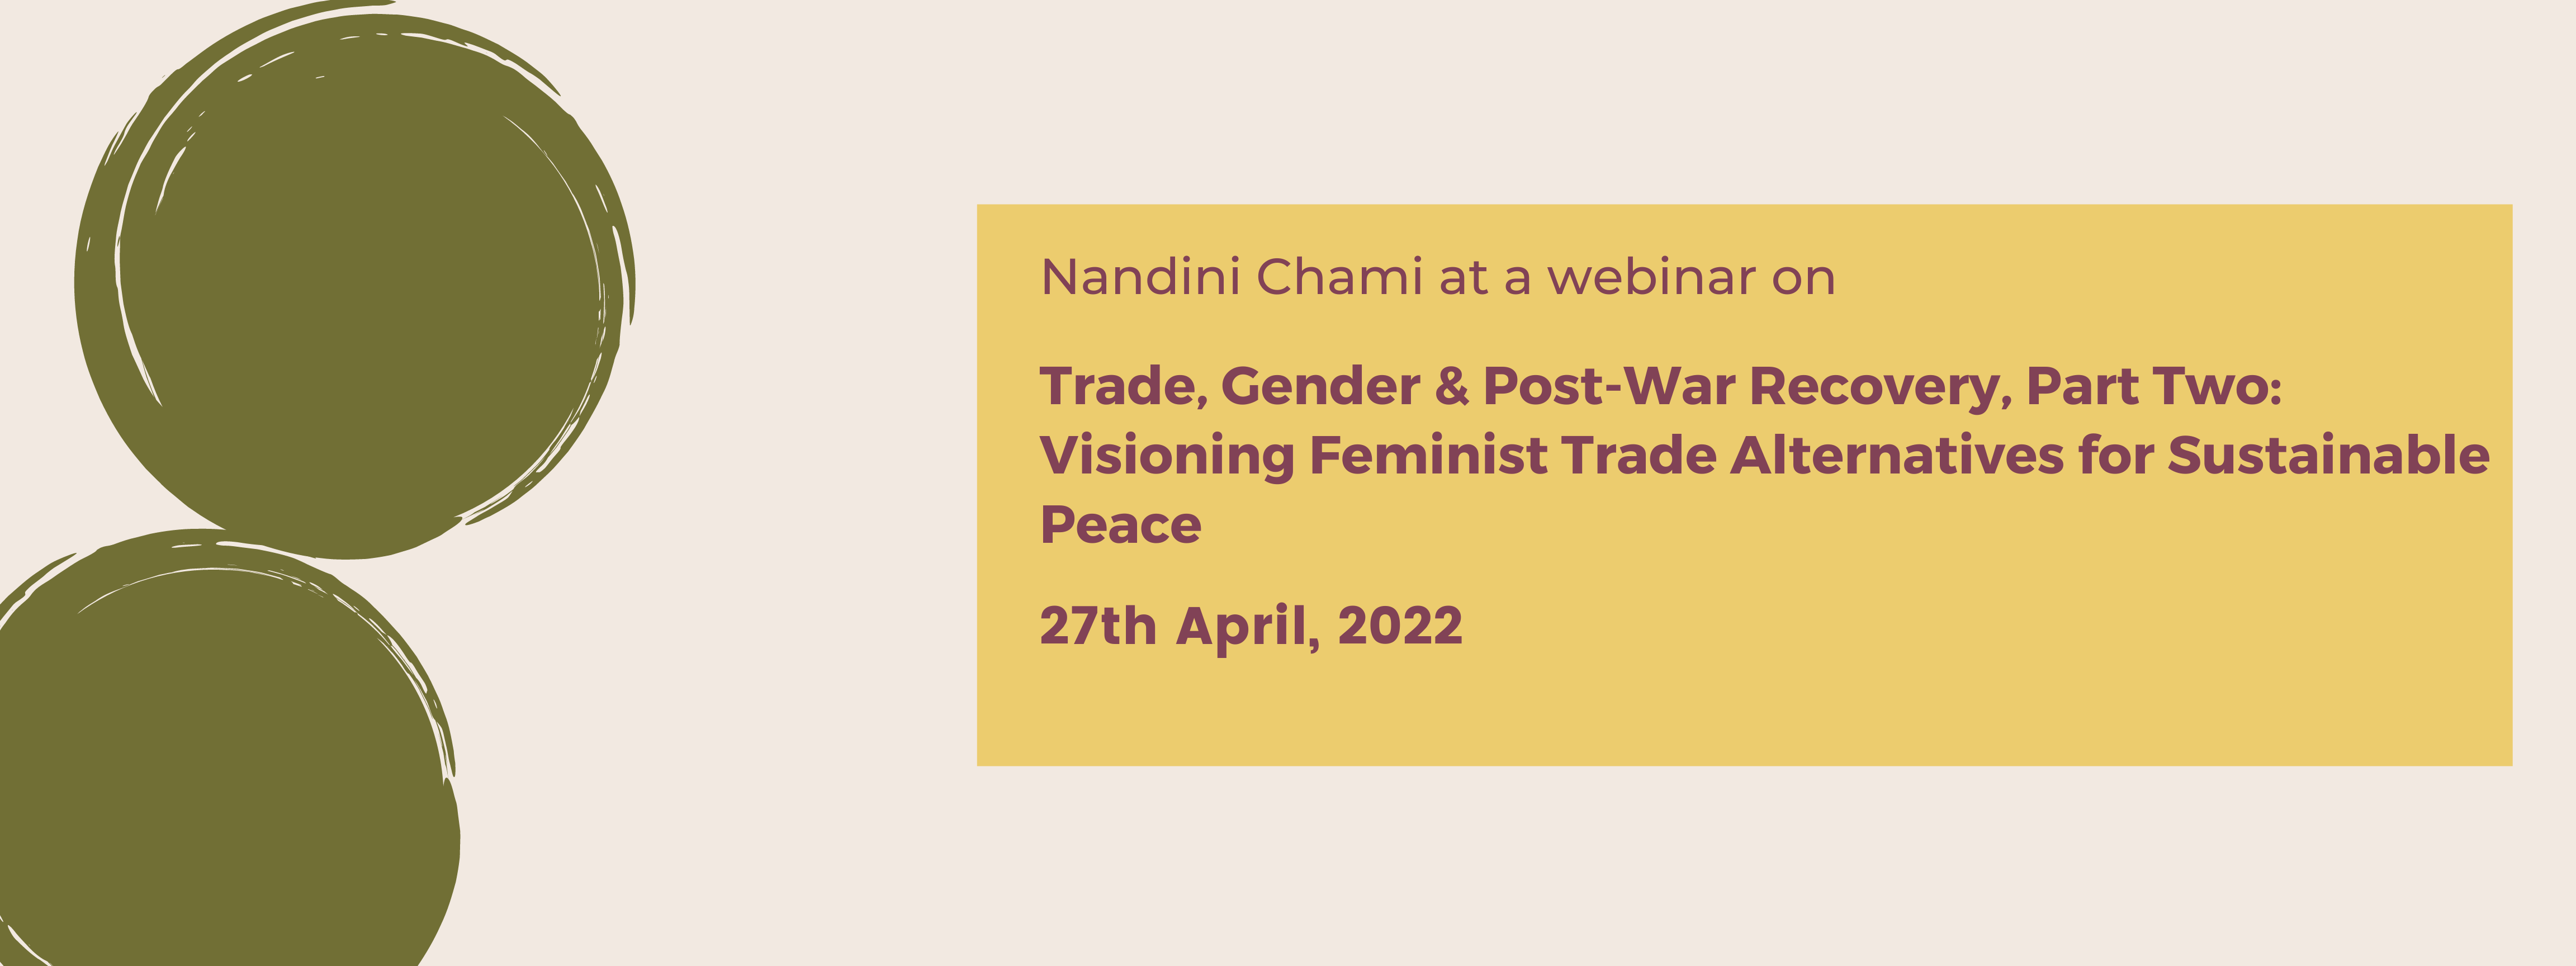 Trade, Gender & Post-War Recovery, Part Two: Visioning Feminist Trade Alternatives for Sustainable Peace